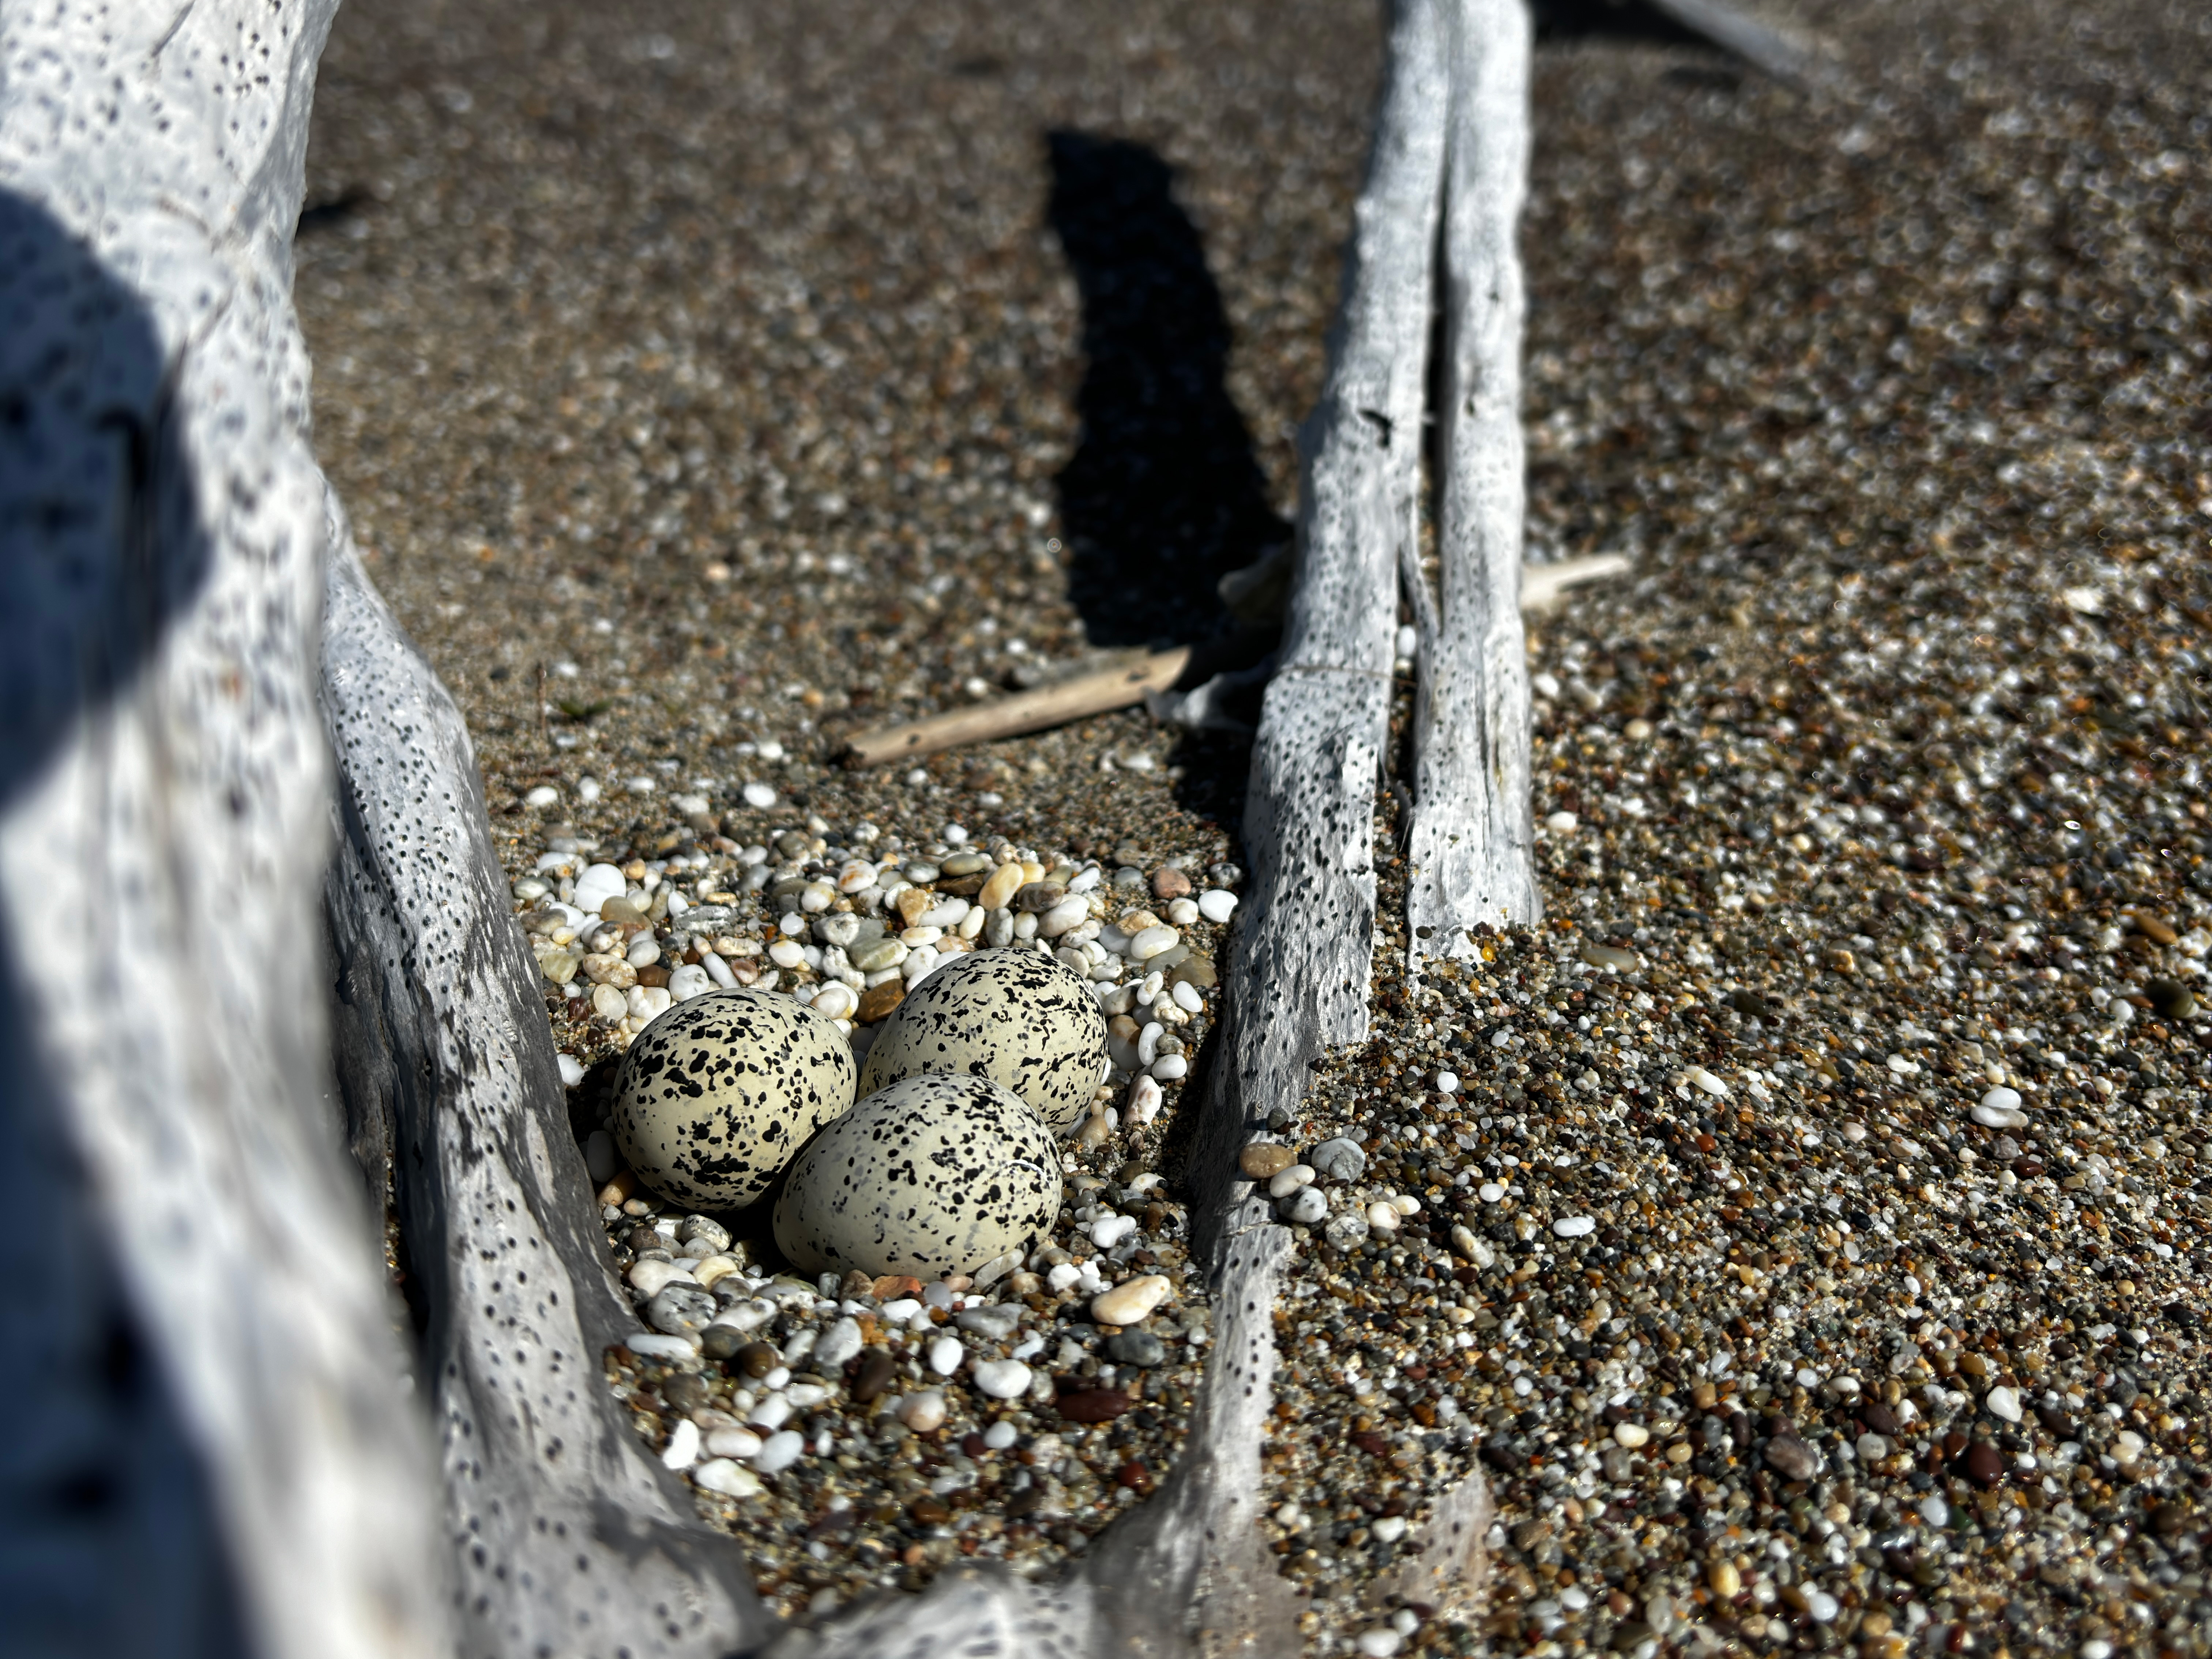 A photo of three small black-speckled, beige-colored egg sitting on sand between two branches of a piece of driftwood.